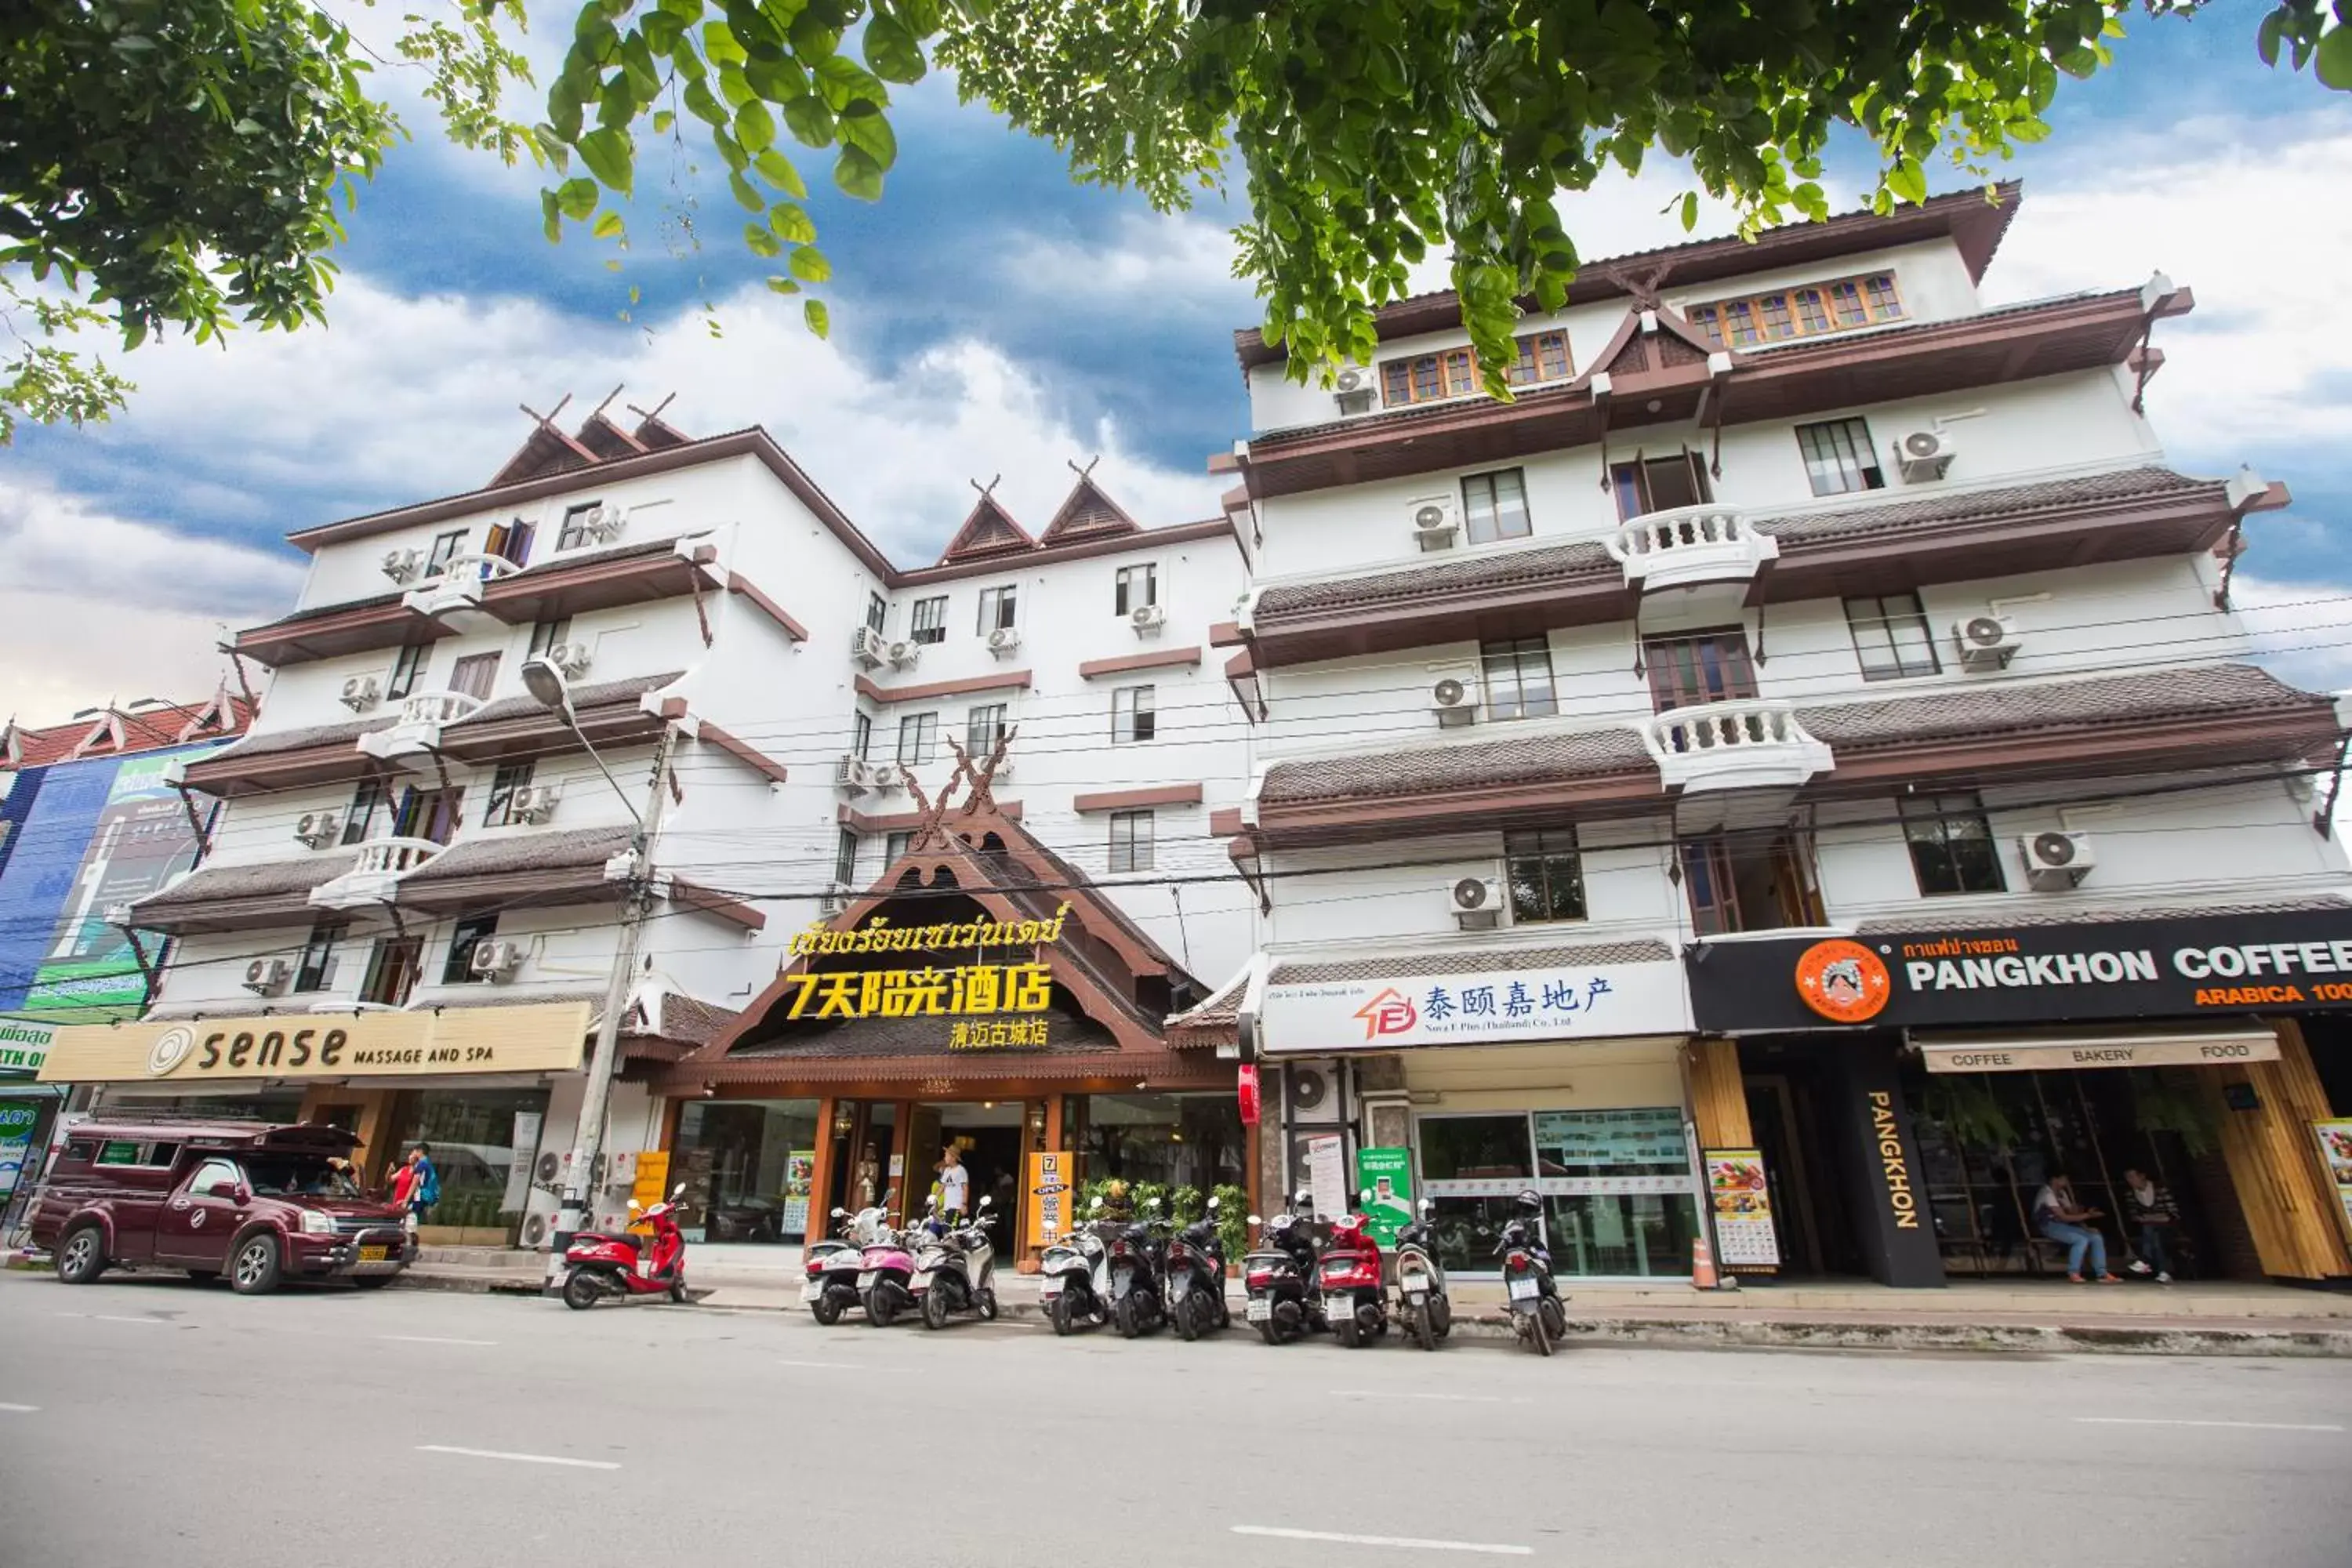 Property Building in Chiang Roi 7 Days Inn